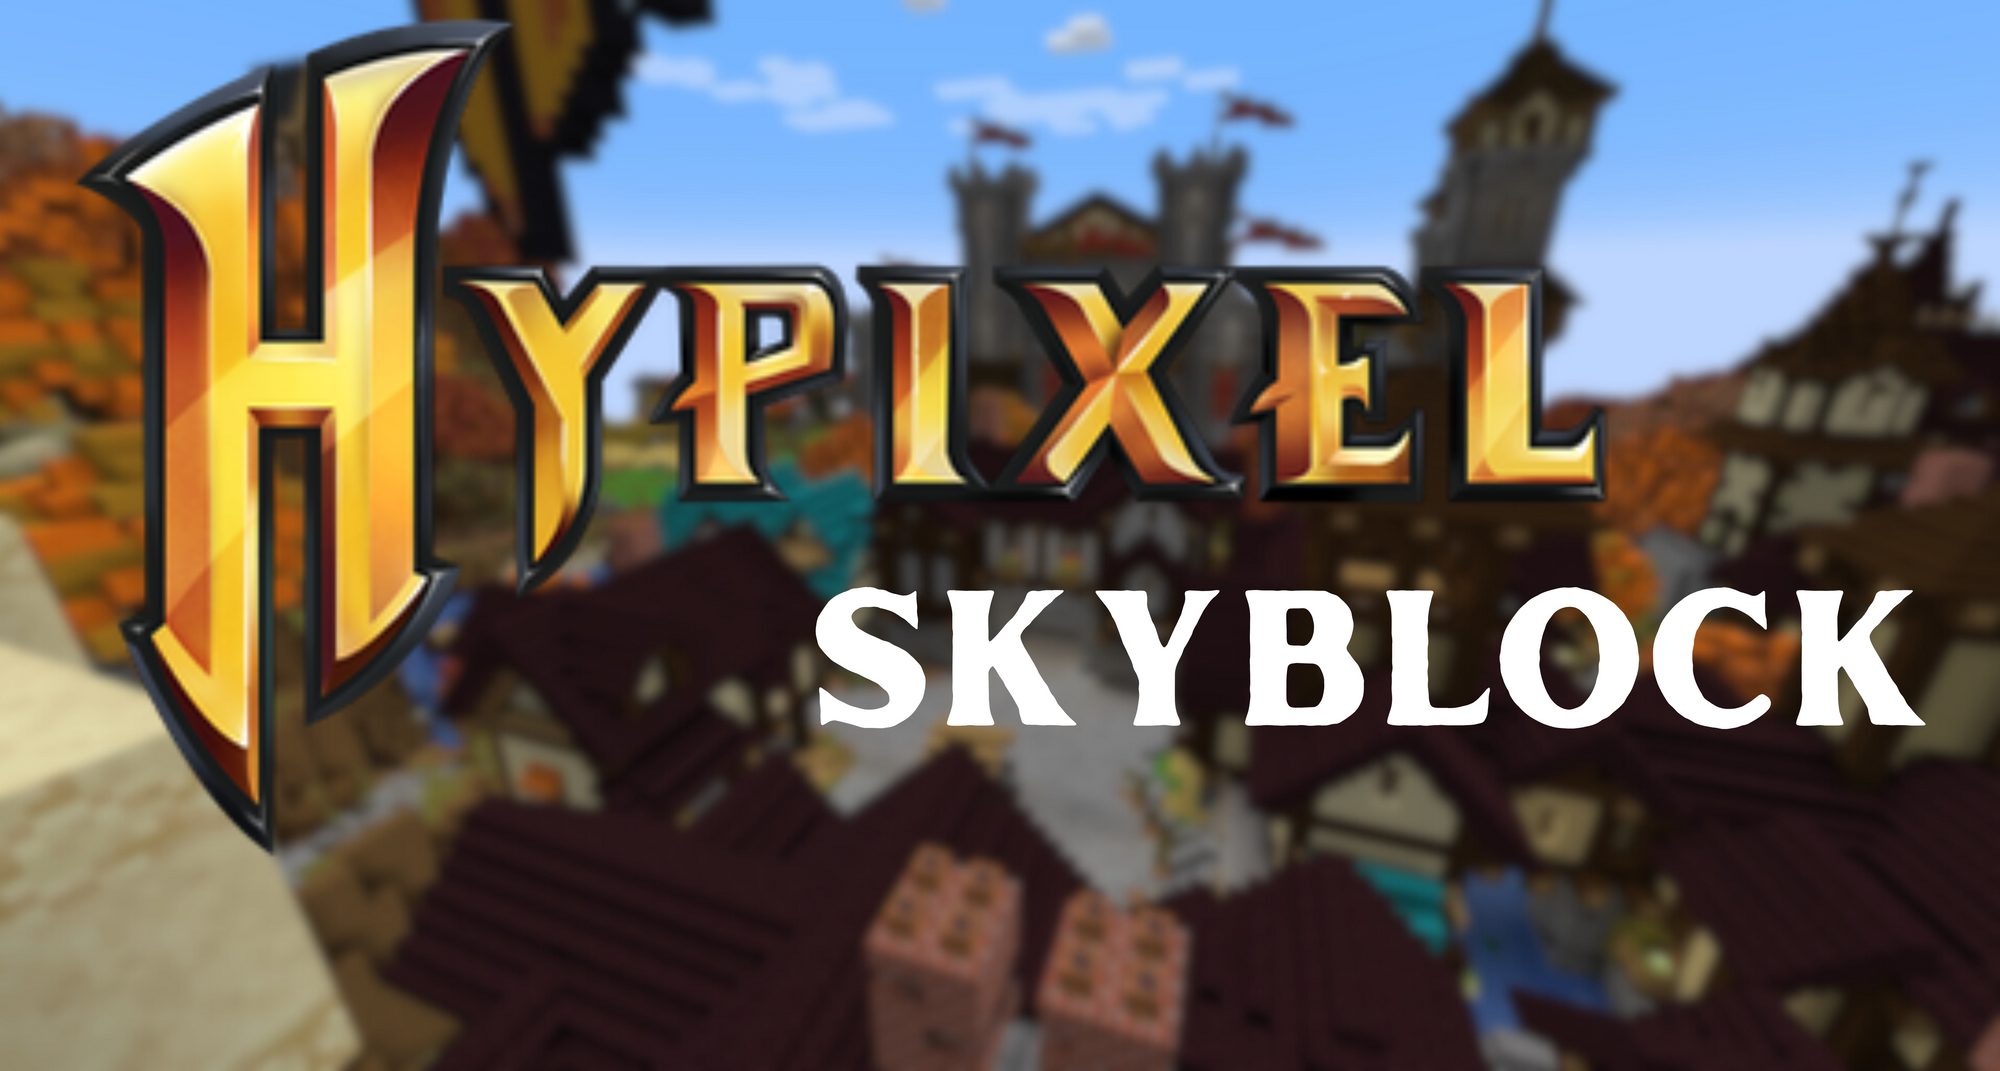 Around Colosseum - Hypixel SkyBlock Wiki